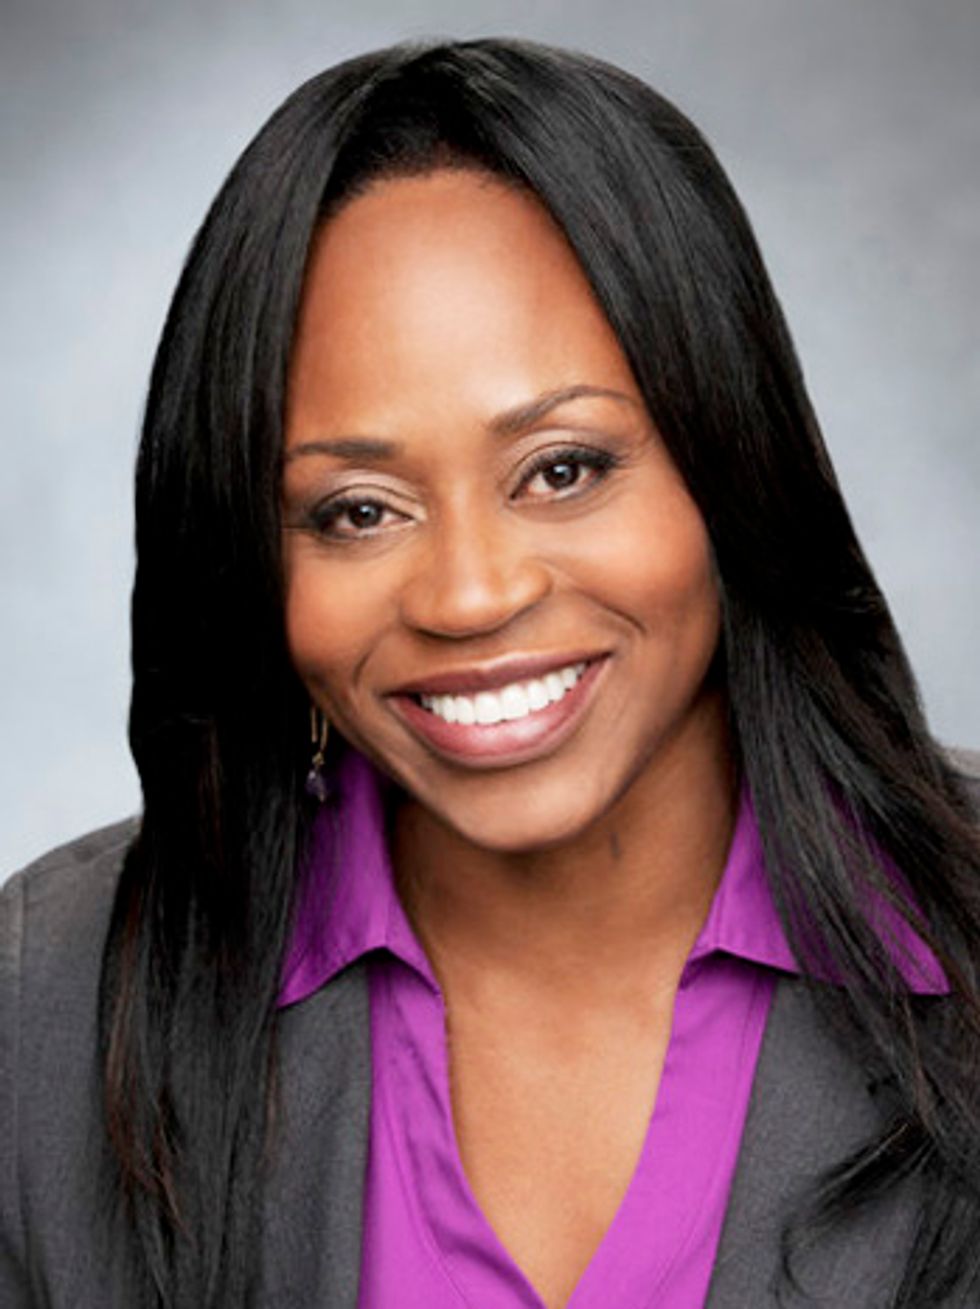 Pearlena Igbokwe Makes History as the First Nigerian Woman to Lead a Major U.S. TV Network